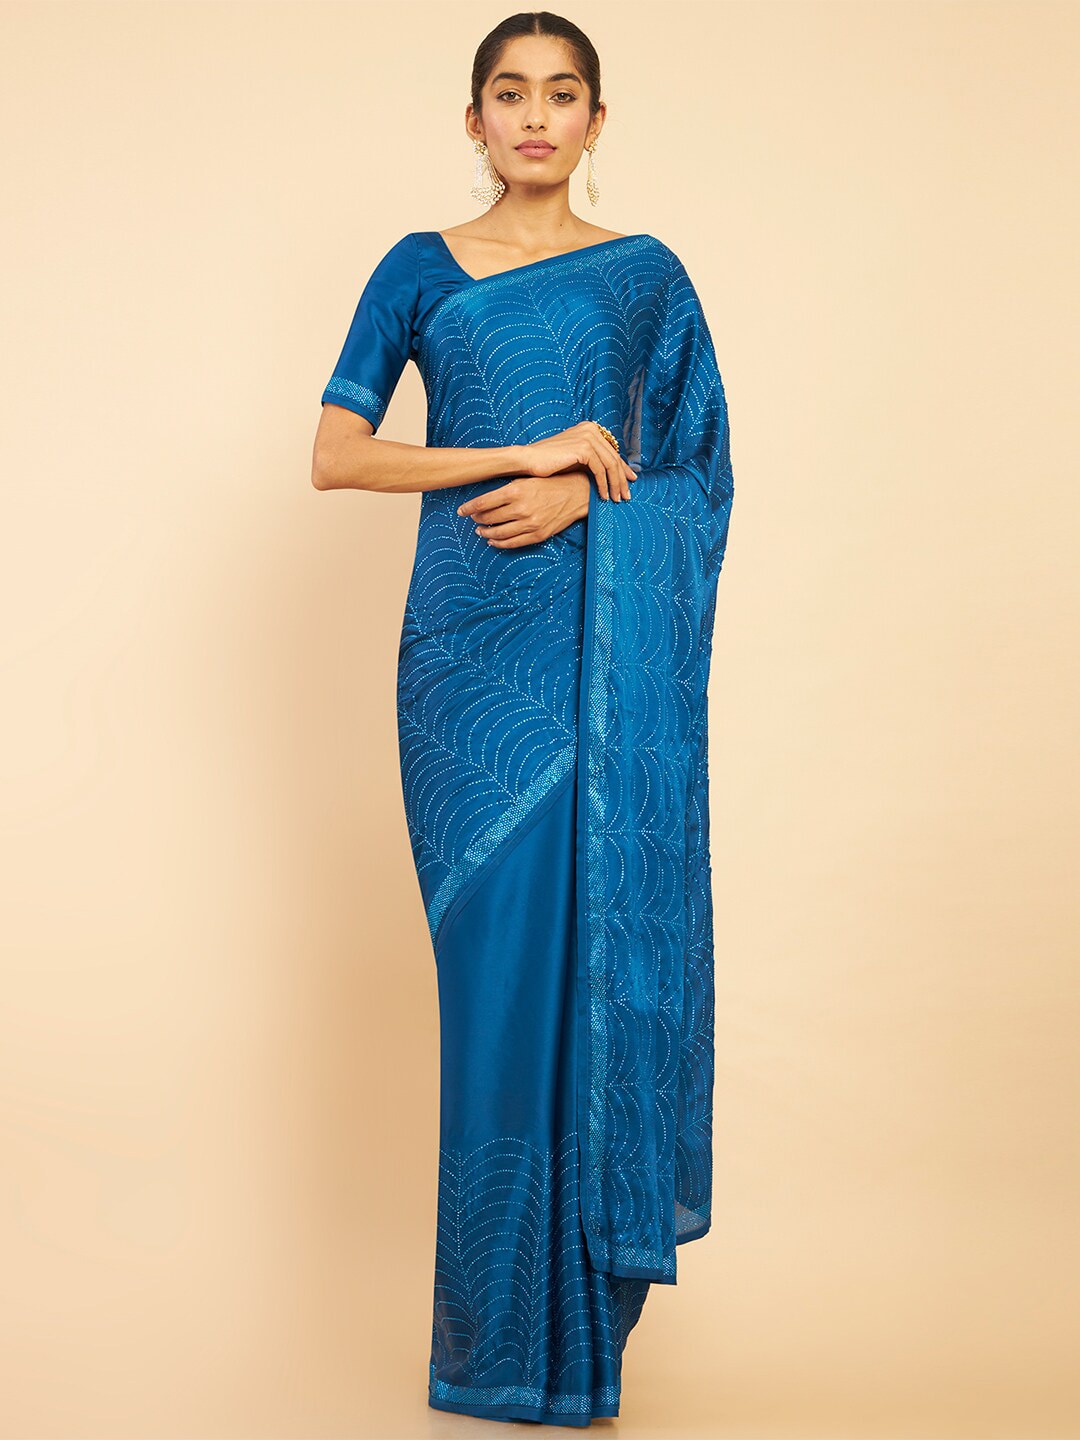 Soch Blue & Silver-Toned Embellished Pure Crepe Saree Price in India